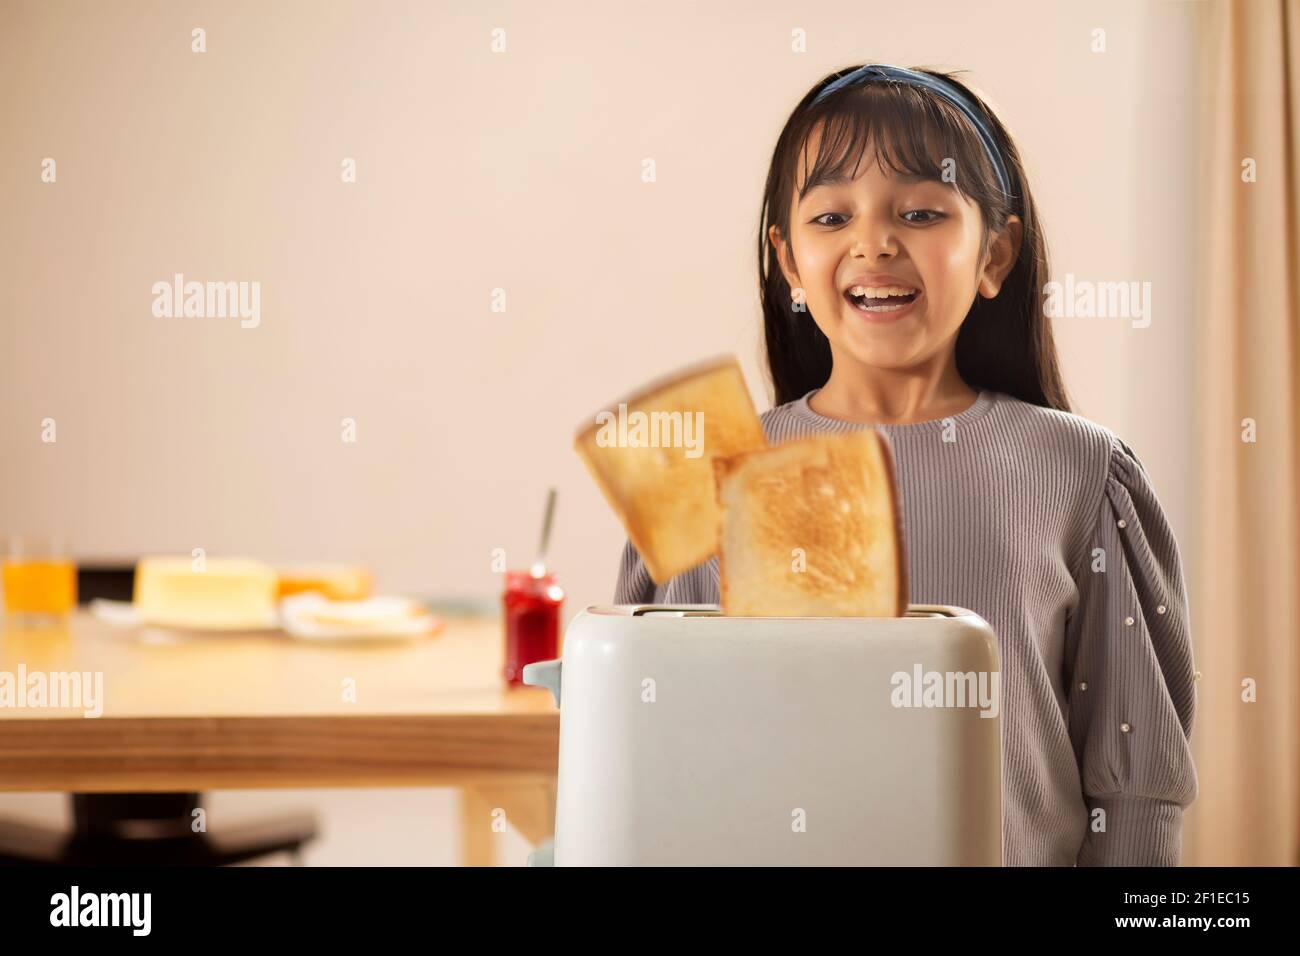 A HAPPY GIRL LOOKING AT BREAD TOAST POPPING OUT OF A TOASTER Stock Photo